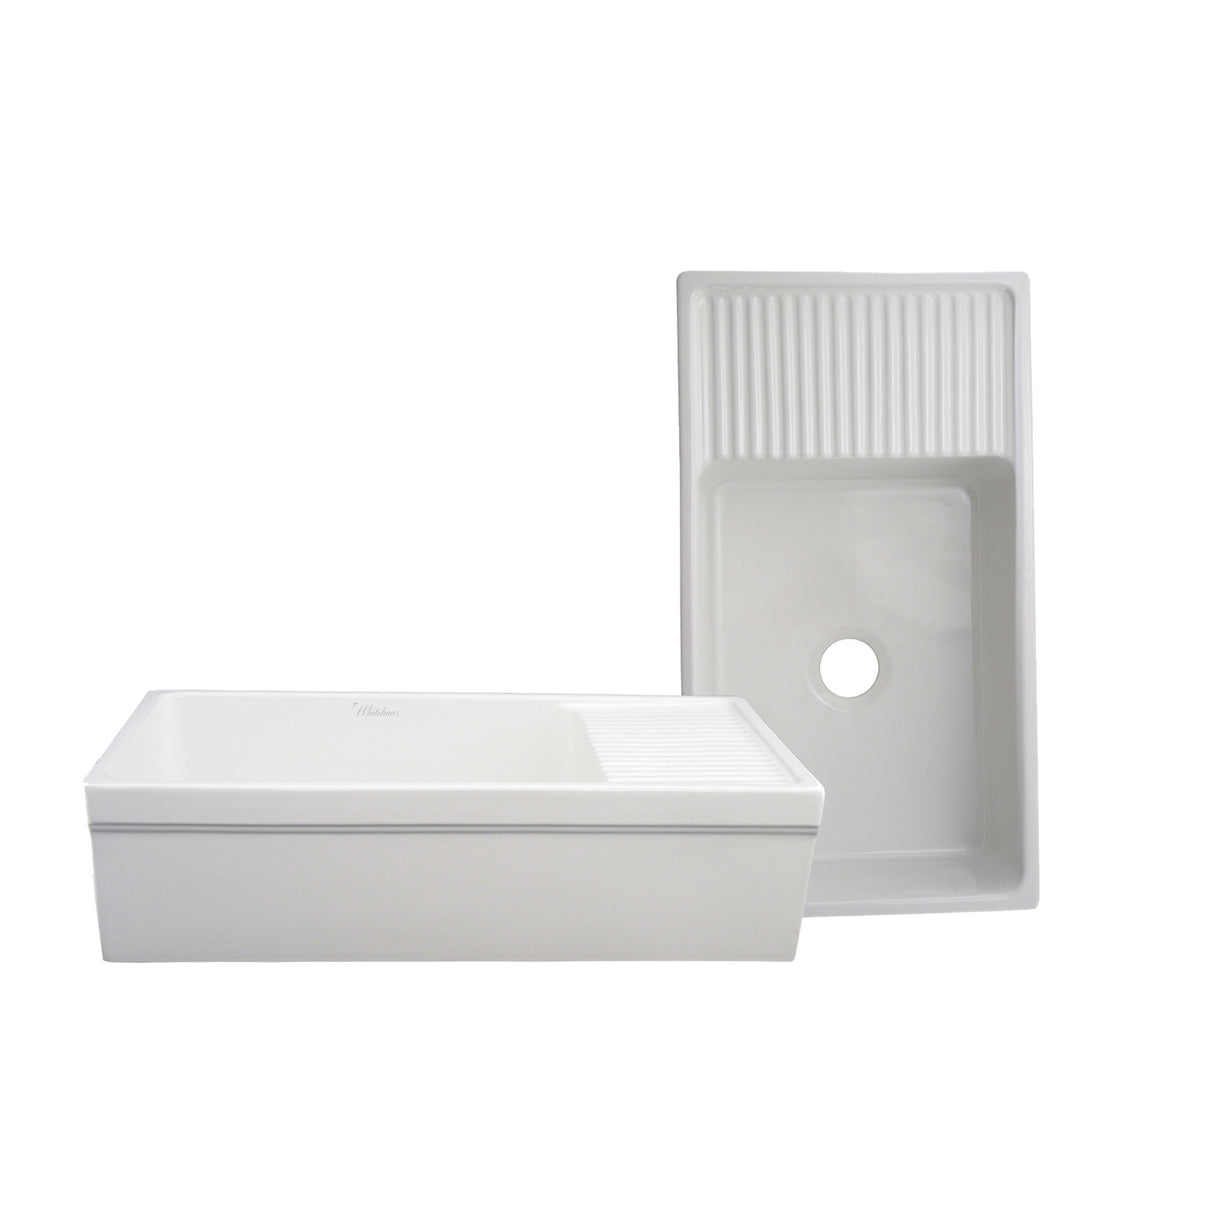 Farmhaus Fireclay Quatro Alcove Large Reversible Sink with Integral Drainboard and Decorative 2 ½" Lip on Both Sides